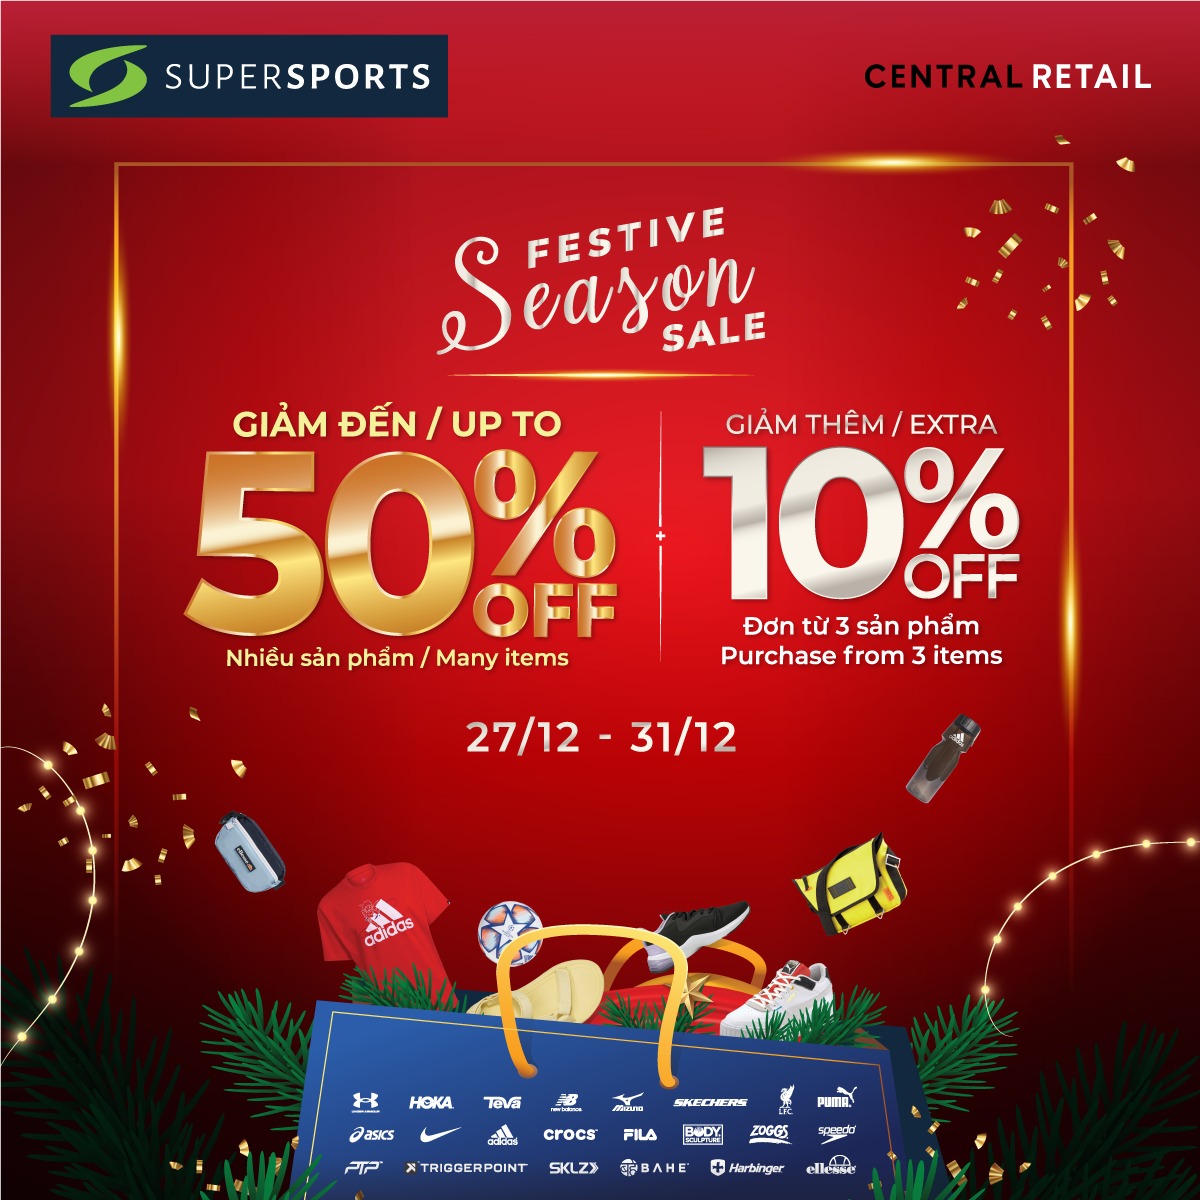 YEAR-END SUPER DEAL: UP TO 50% OFF MANY PRODUCTS & EXTRA 10% OFF TOTAL BILL AT SUPERPSORTS